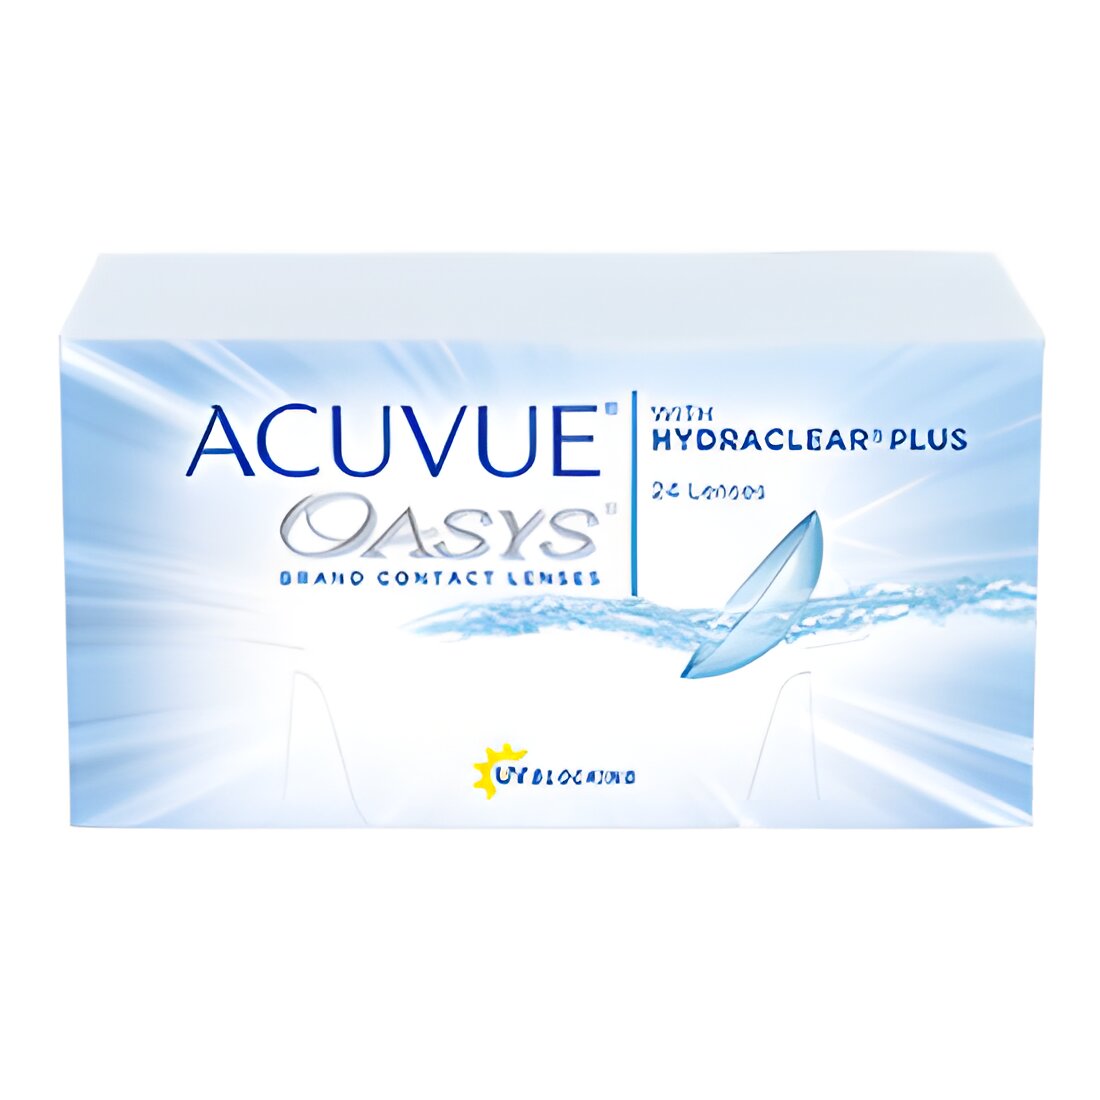 Free Acuvue Contact Lenses In The Mail